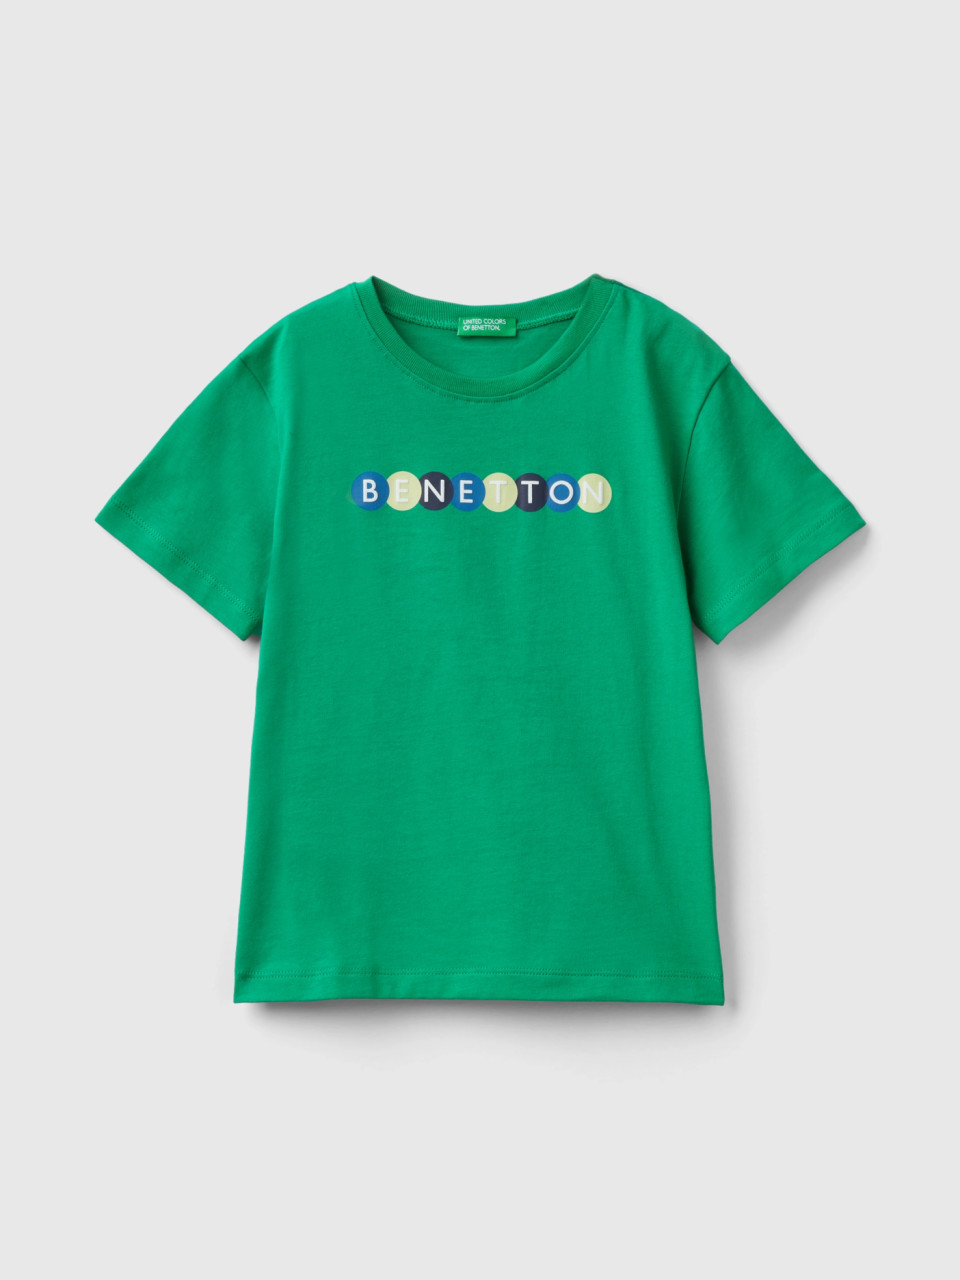 Benetton, T-shirt With Print In 100% Organic Cotton, Green, Kids